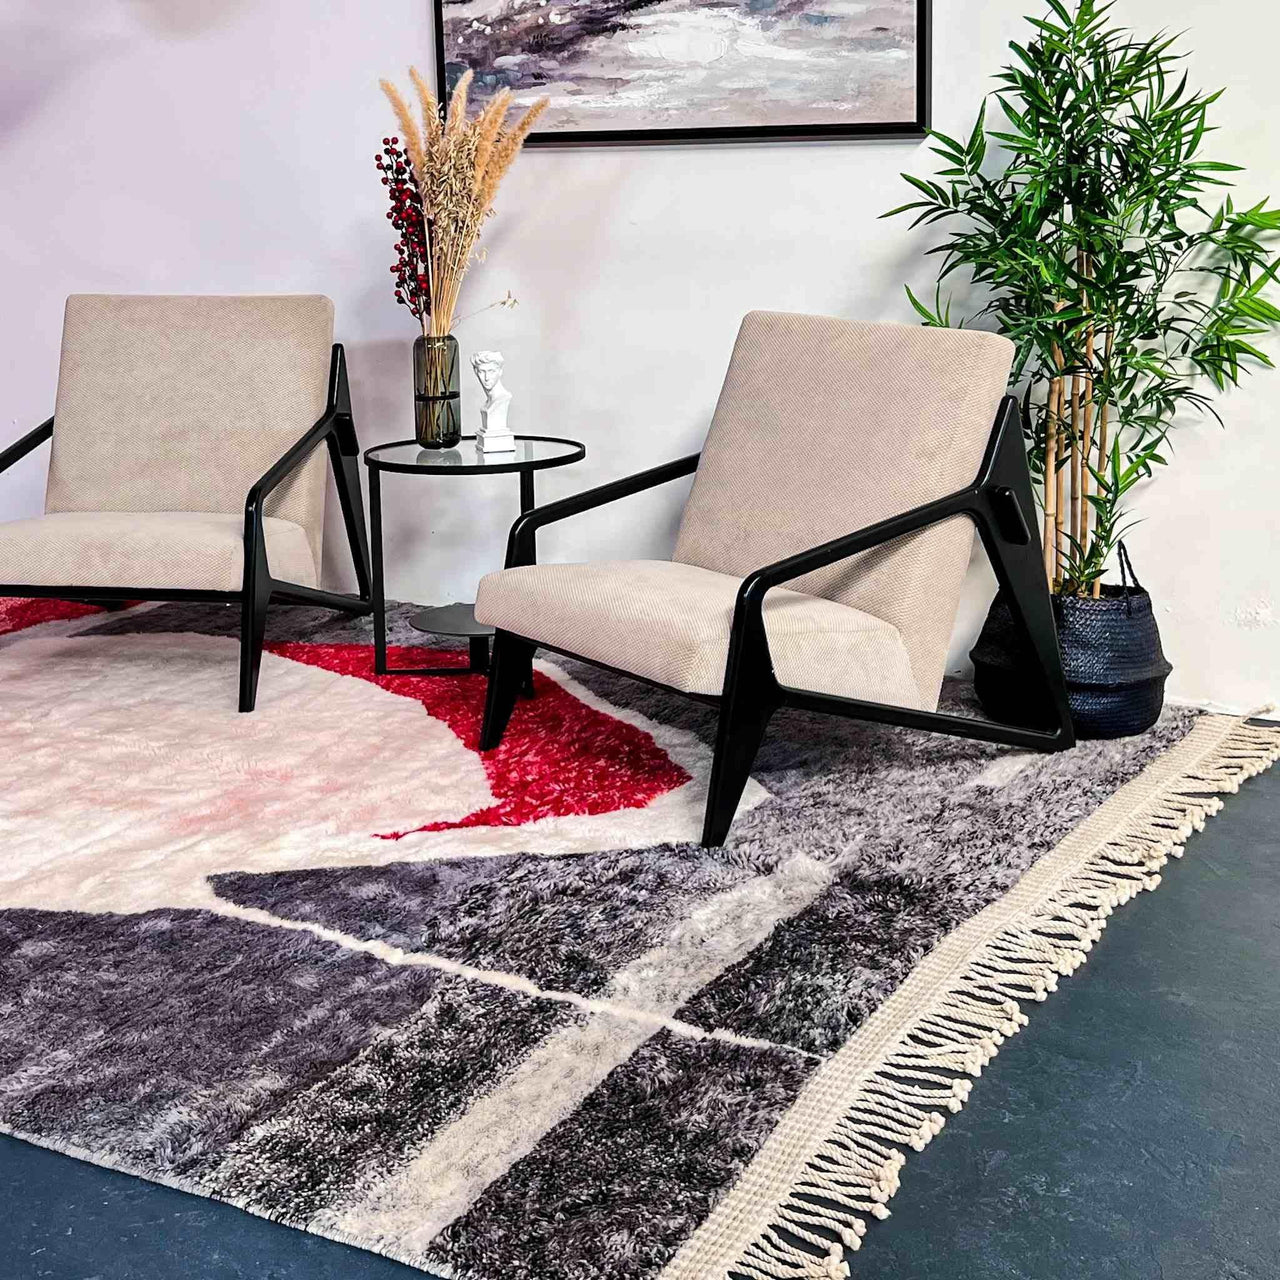 Make a statement with the Rosy Abstract Handwoven 100% Wool Beni Mrirt Rug, a stunning Beni Ourain rug measuring 8.1 X 9.9 ft / 247 X 304 cm. Handcrafted using premium wool, this rug features a beautiful abstract design and luxurious texture.